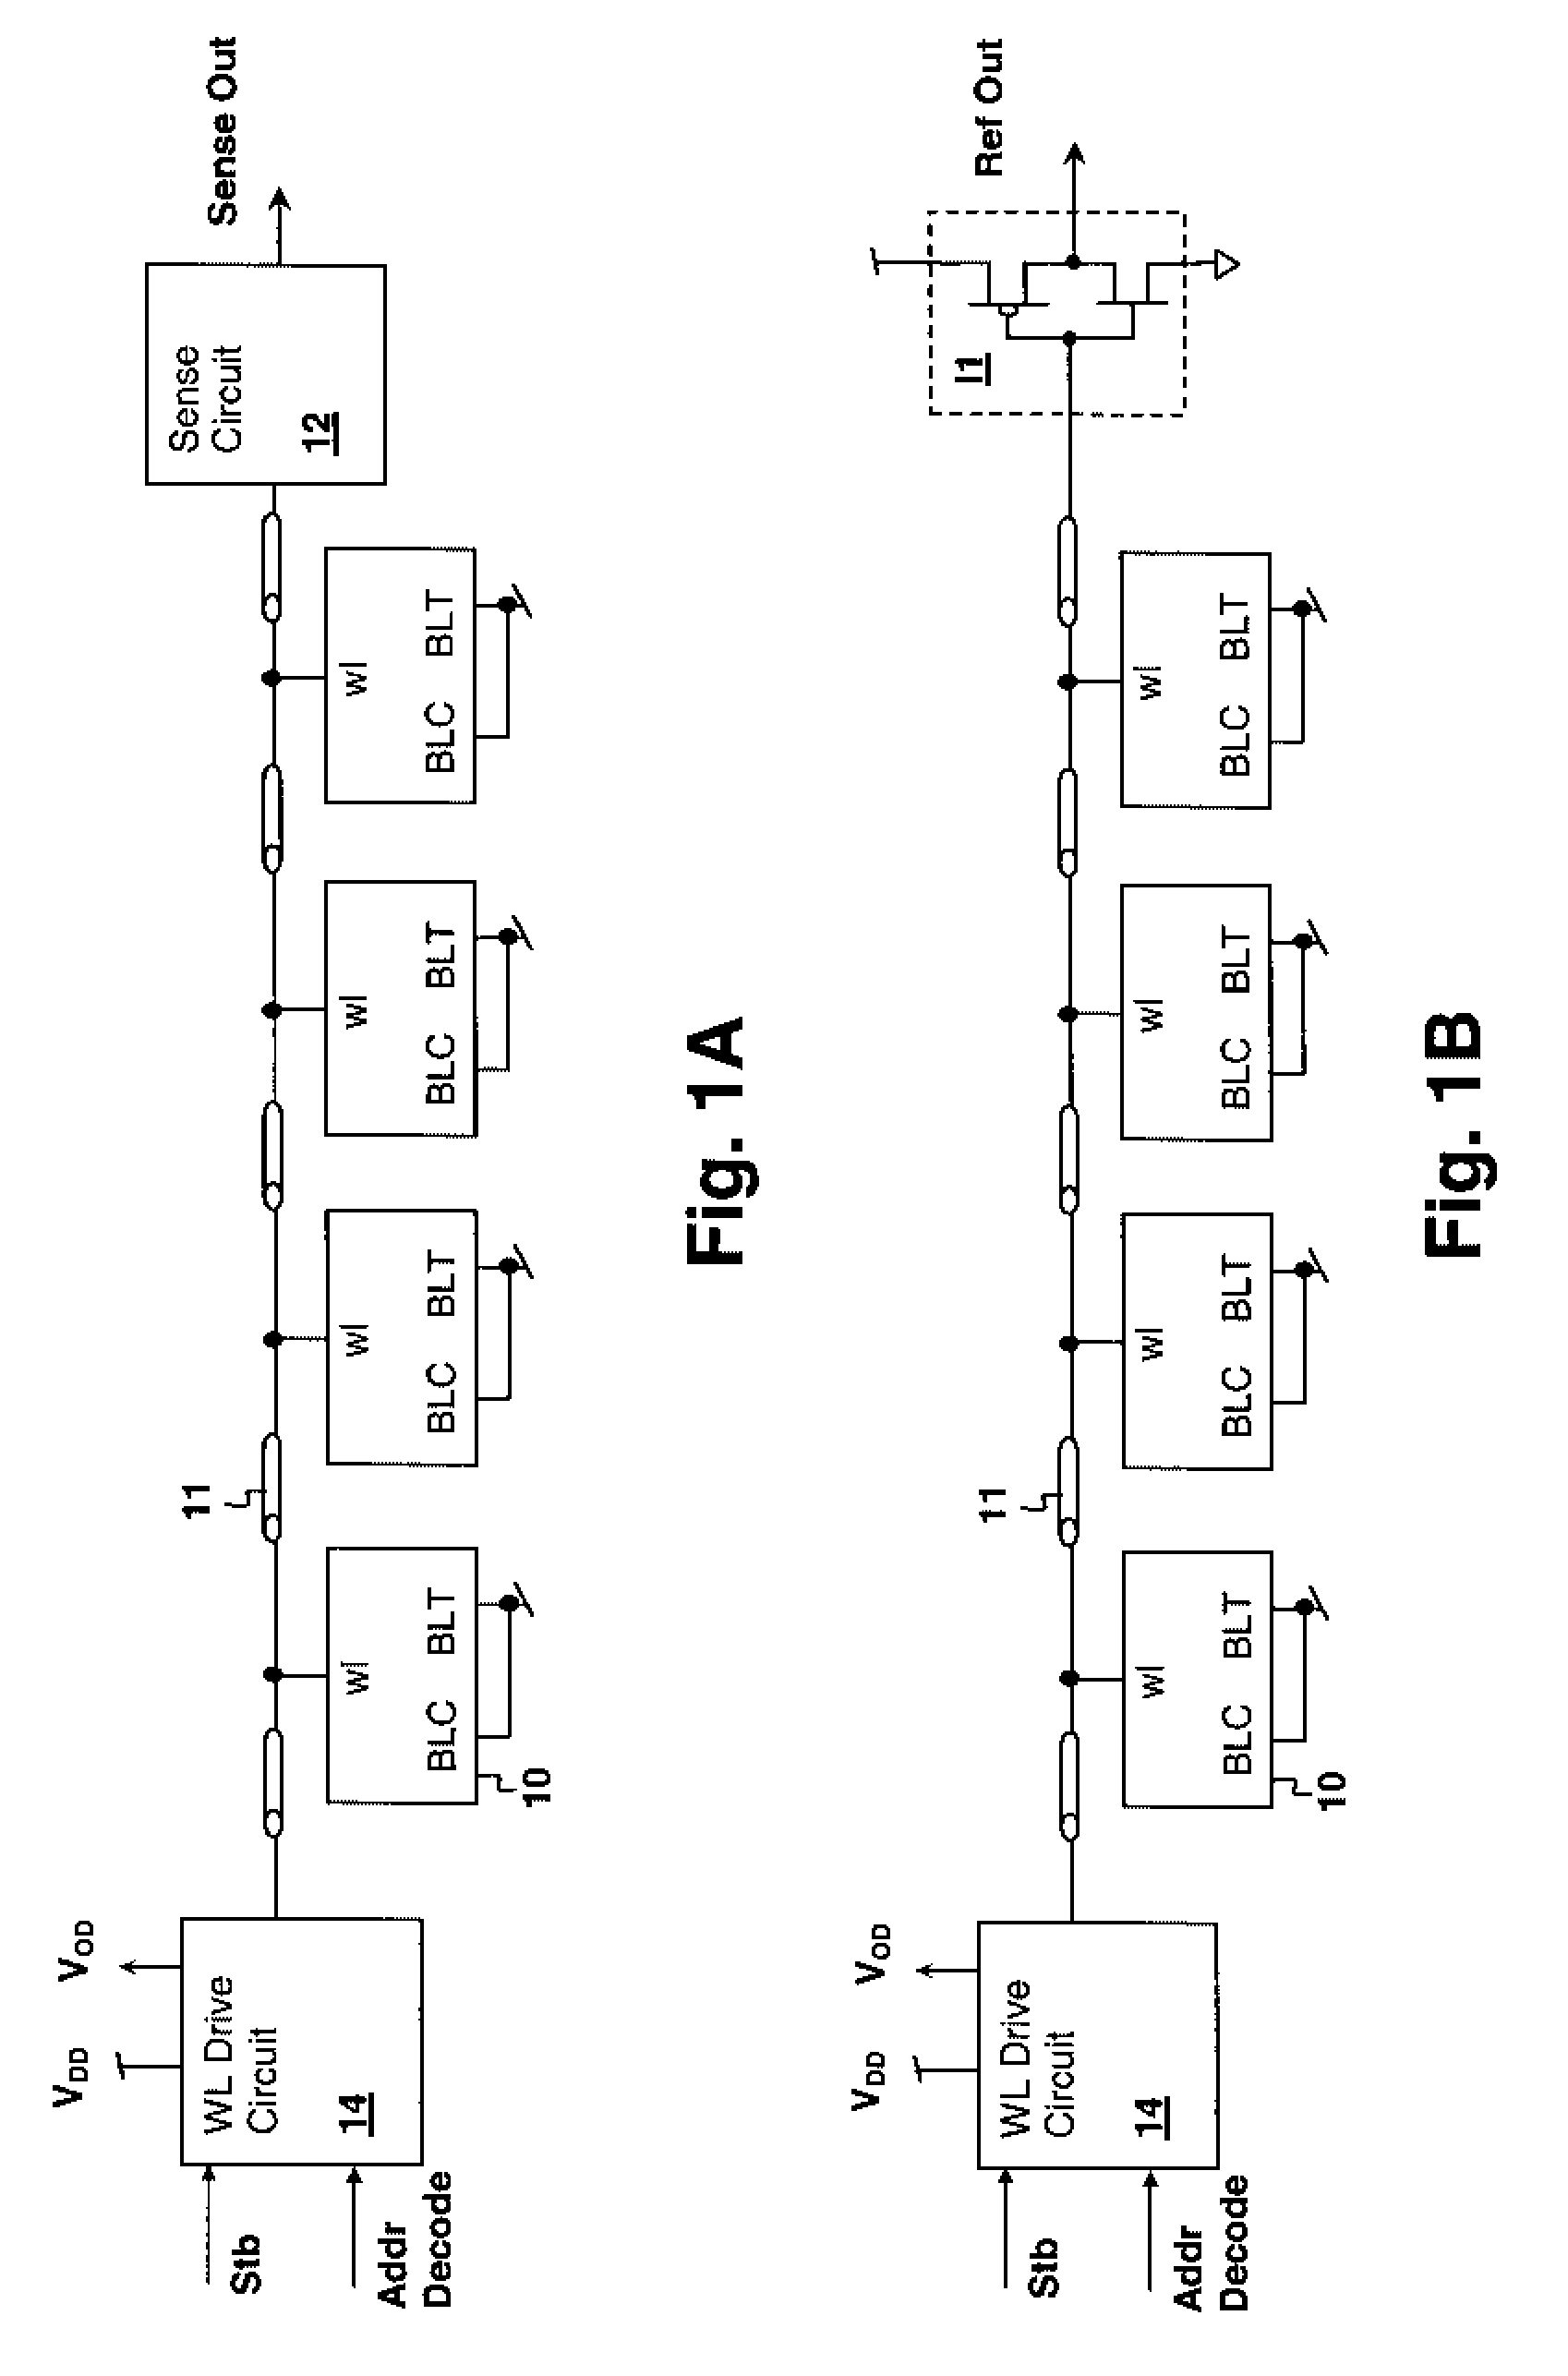 Method for evaluating storage cell design using a wordline timing and cell access detection circuit